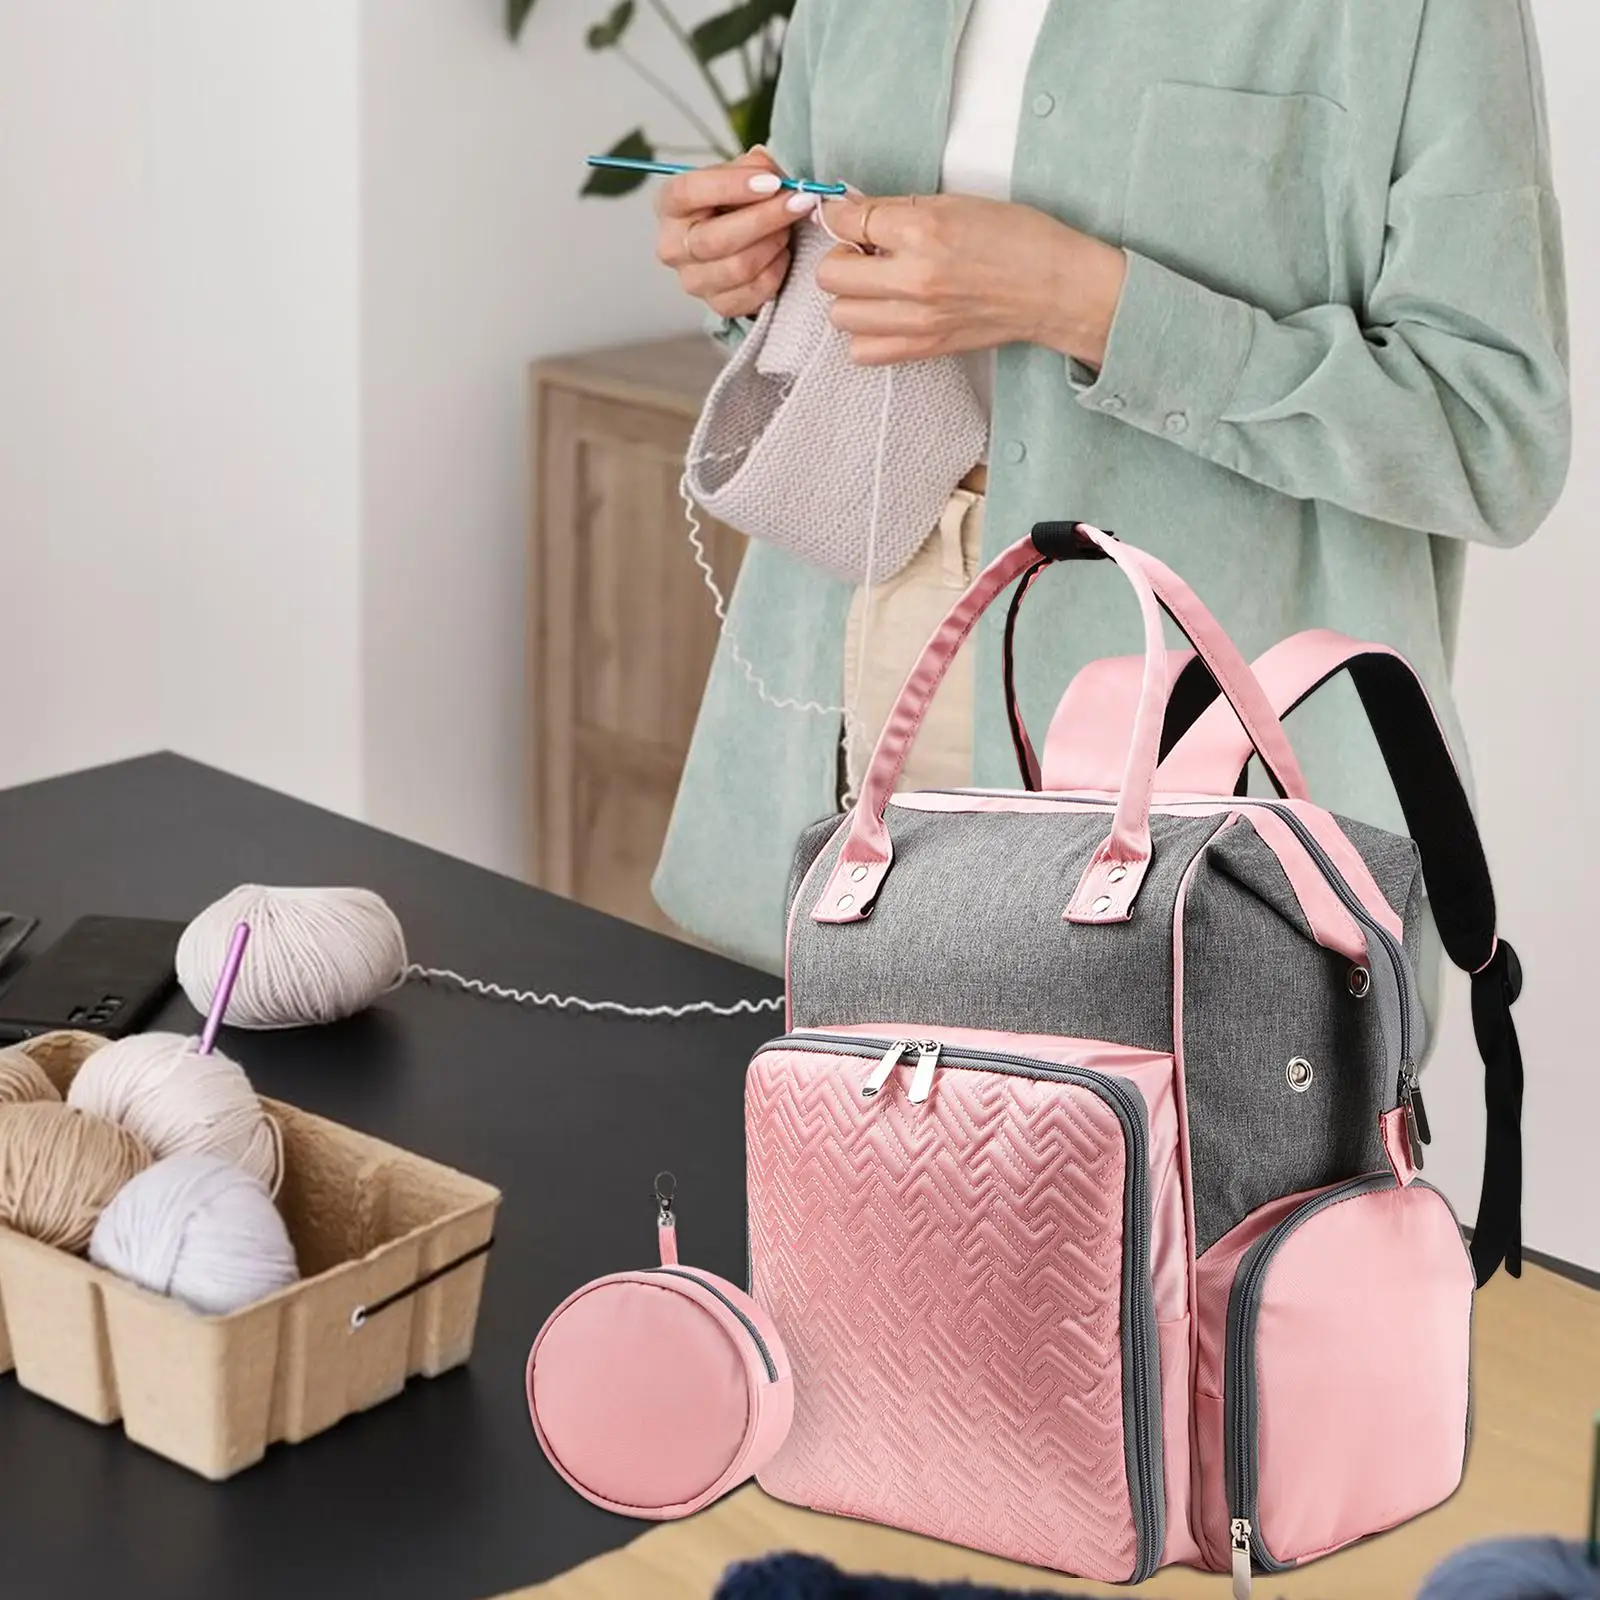 Knitting Bag Backpack Crochet Accessories Portable Water Resistance Knitting Supplies Bag Backpack for Knitting Enthusiasts